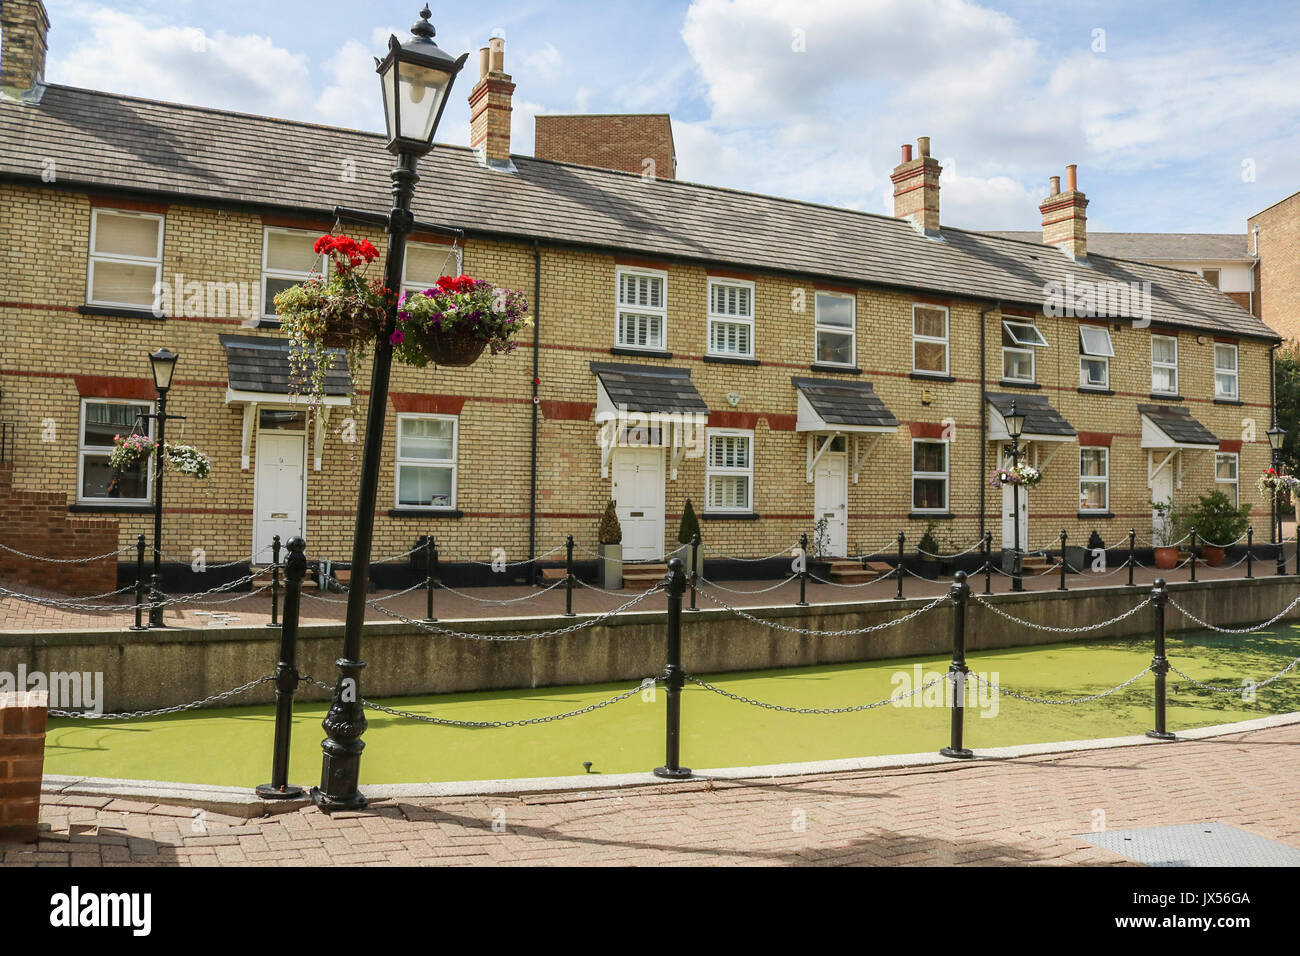 London 14th August 2017. Residential houses overlooking a canal in Limehouse east London covered in growing green algae due to the recent hot weather conditions Credit: amer ghazzal/Alamy Live News Stock Photo